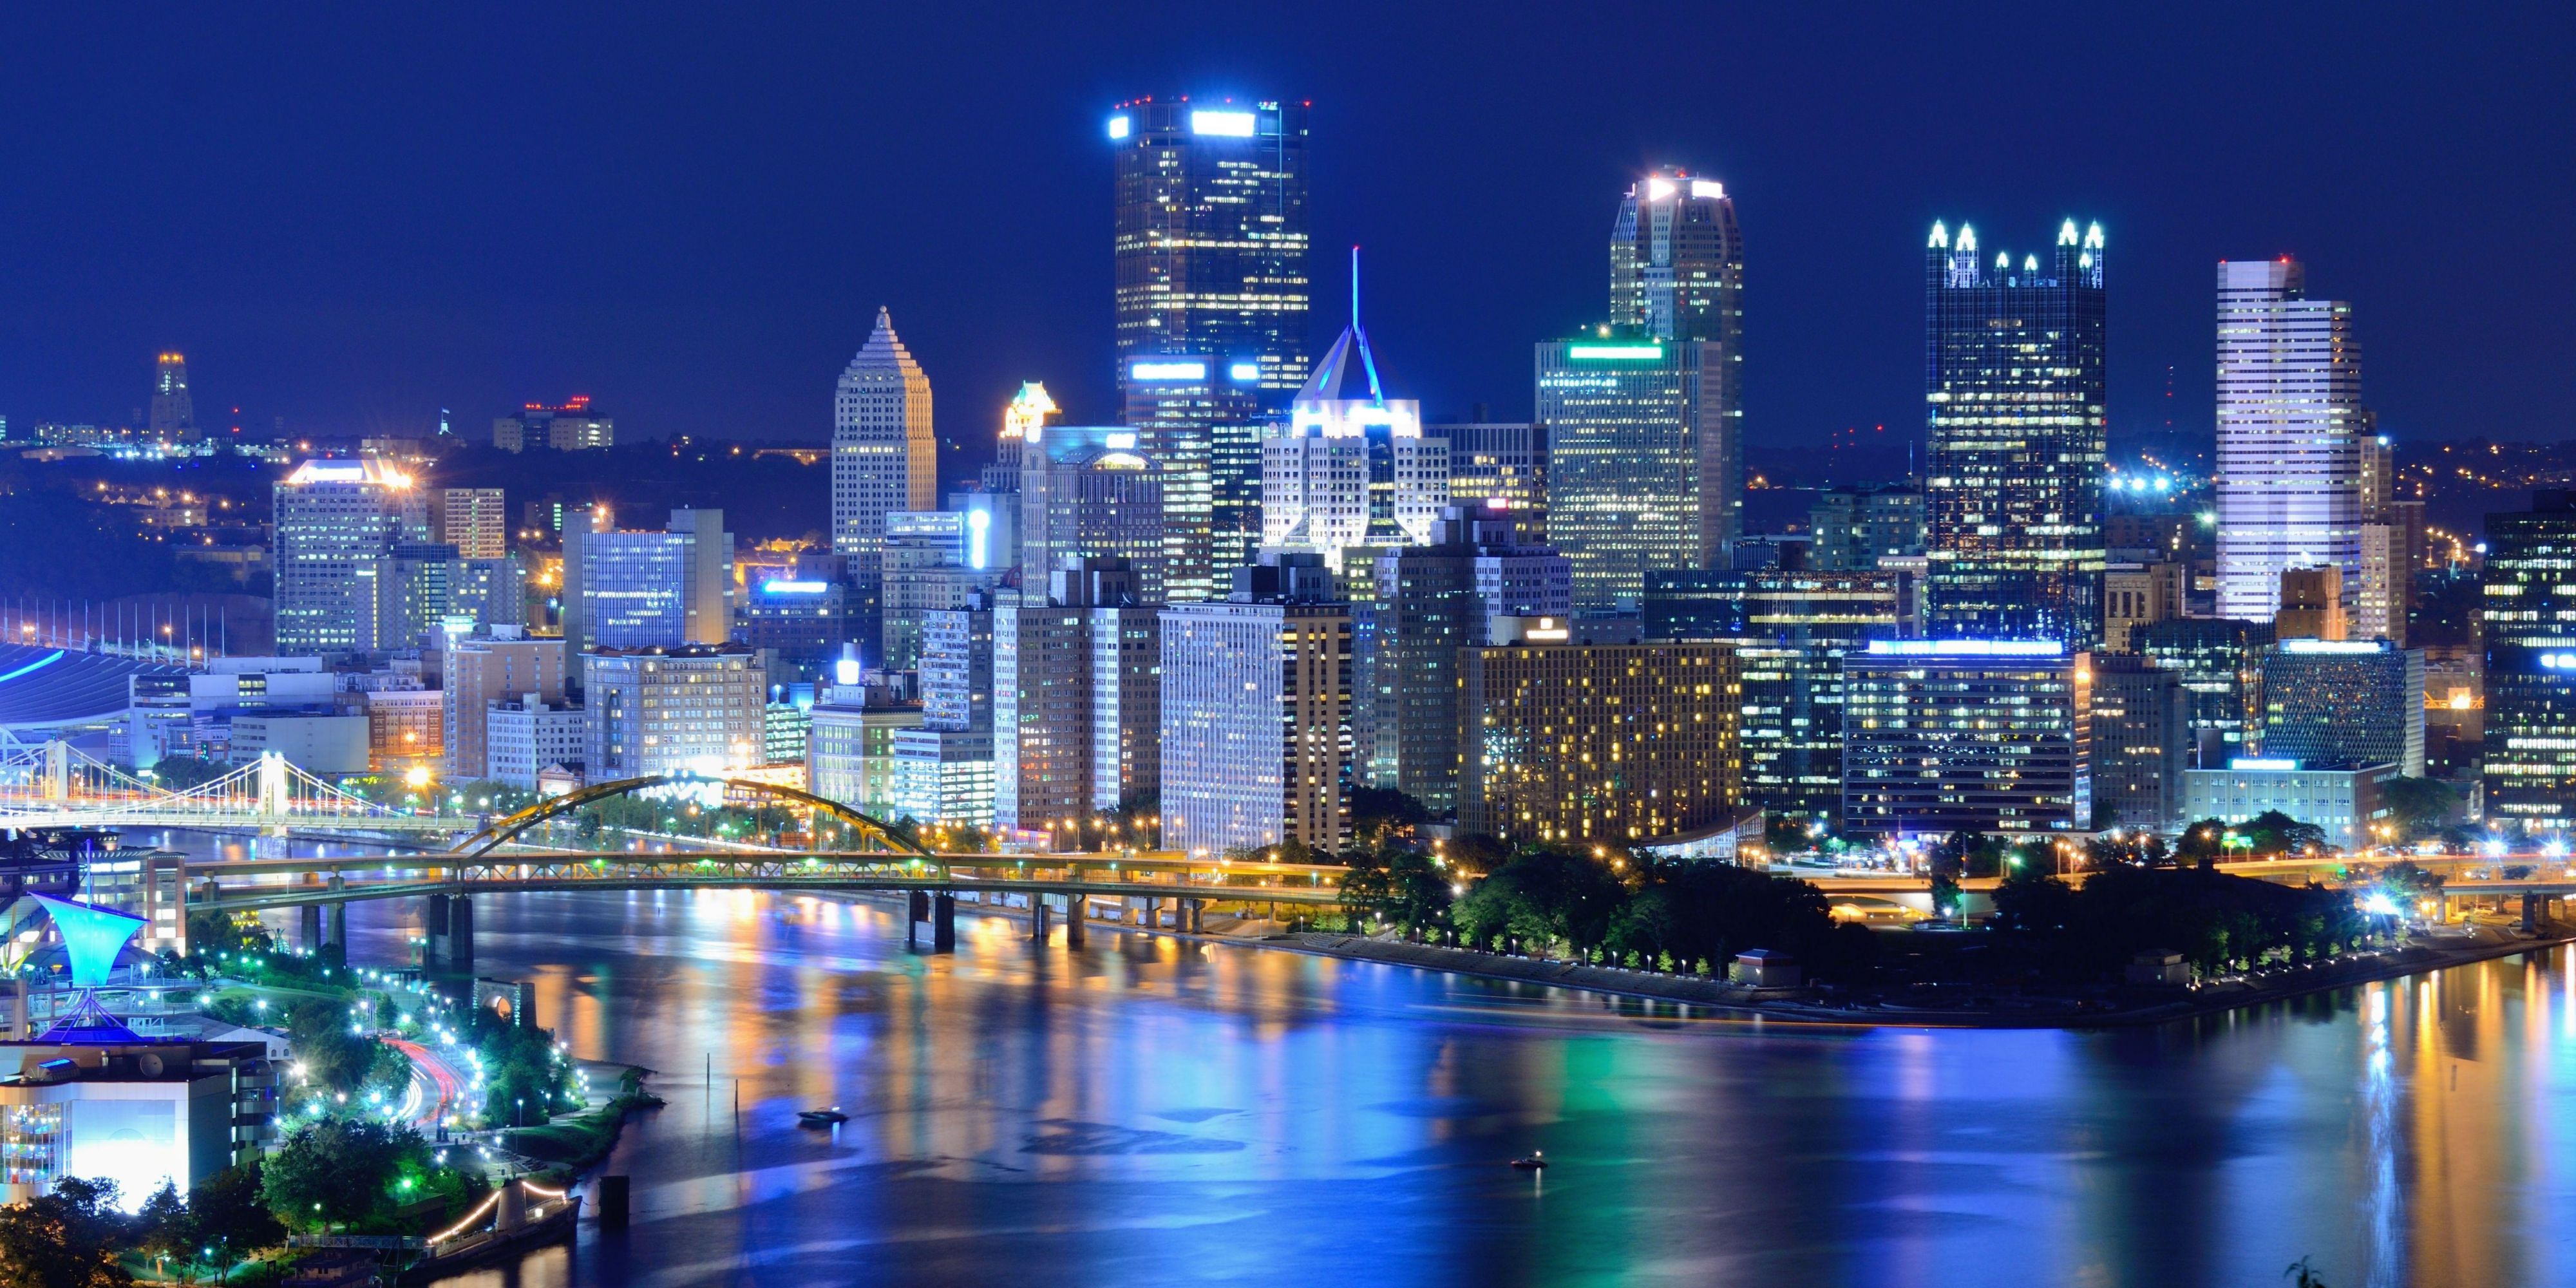 We are just a short walk or ride away from all that Pittsburgh's Cultural District has to offer. Enjoy the Rivers Casino Pittsburgh, Heinz Hall, Benedum Center, Stage AE, The Andy Warhol Museum, the Children’s Museum of Pittsburgh, and more. 